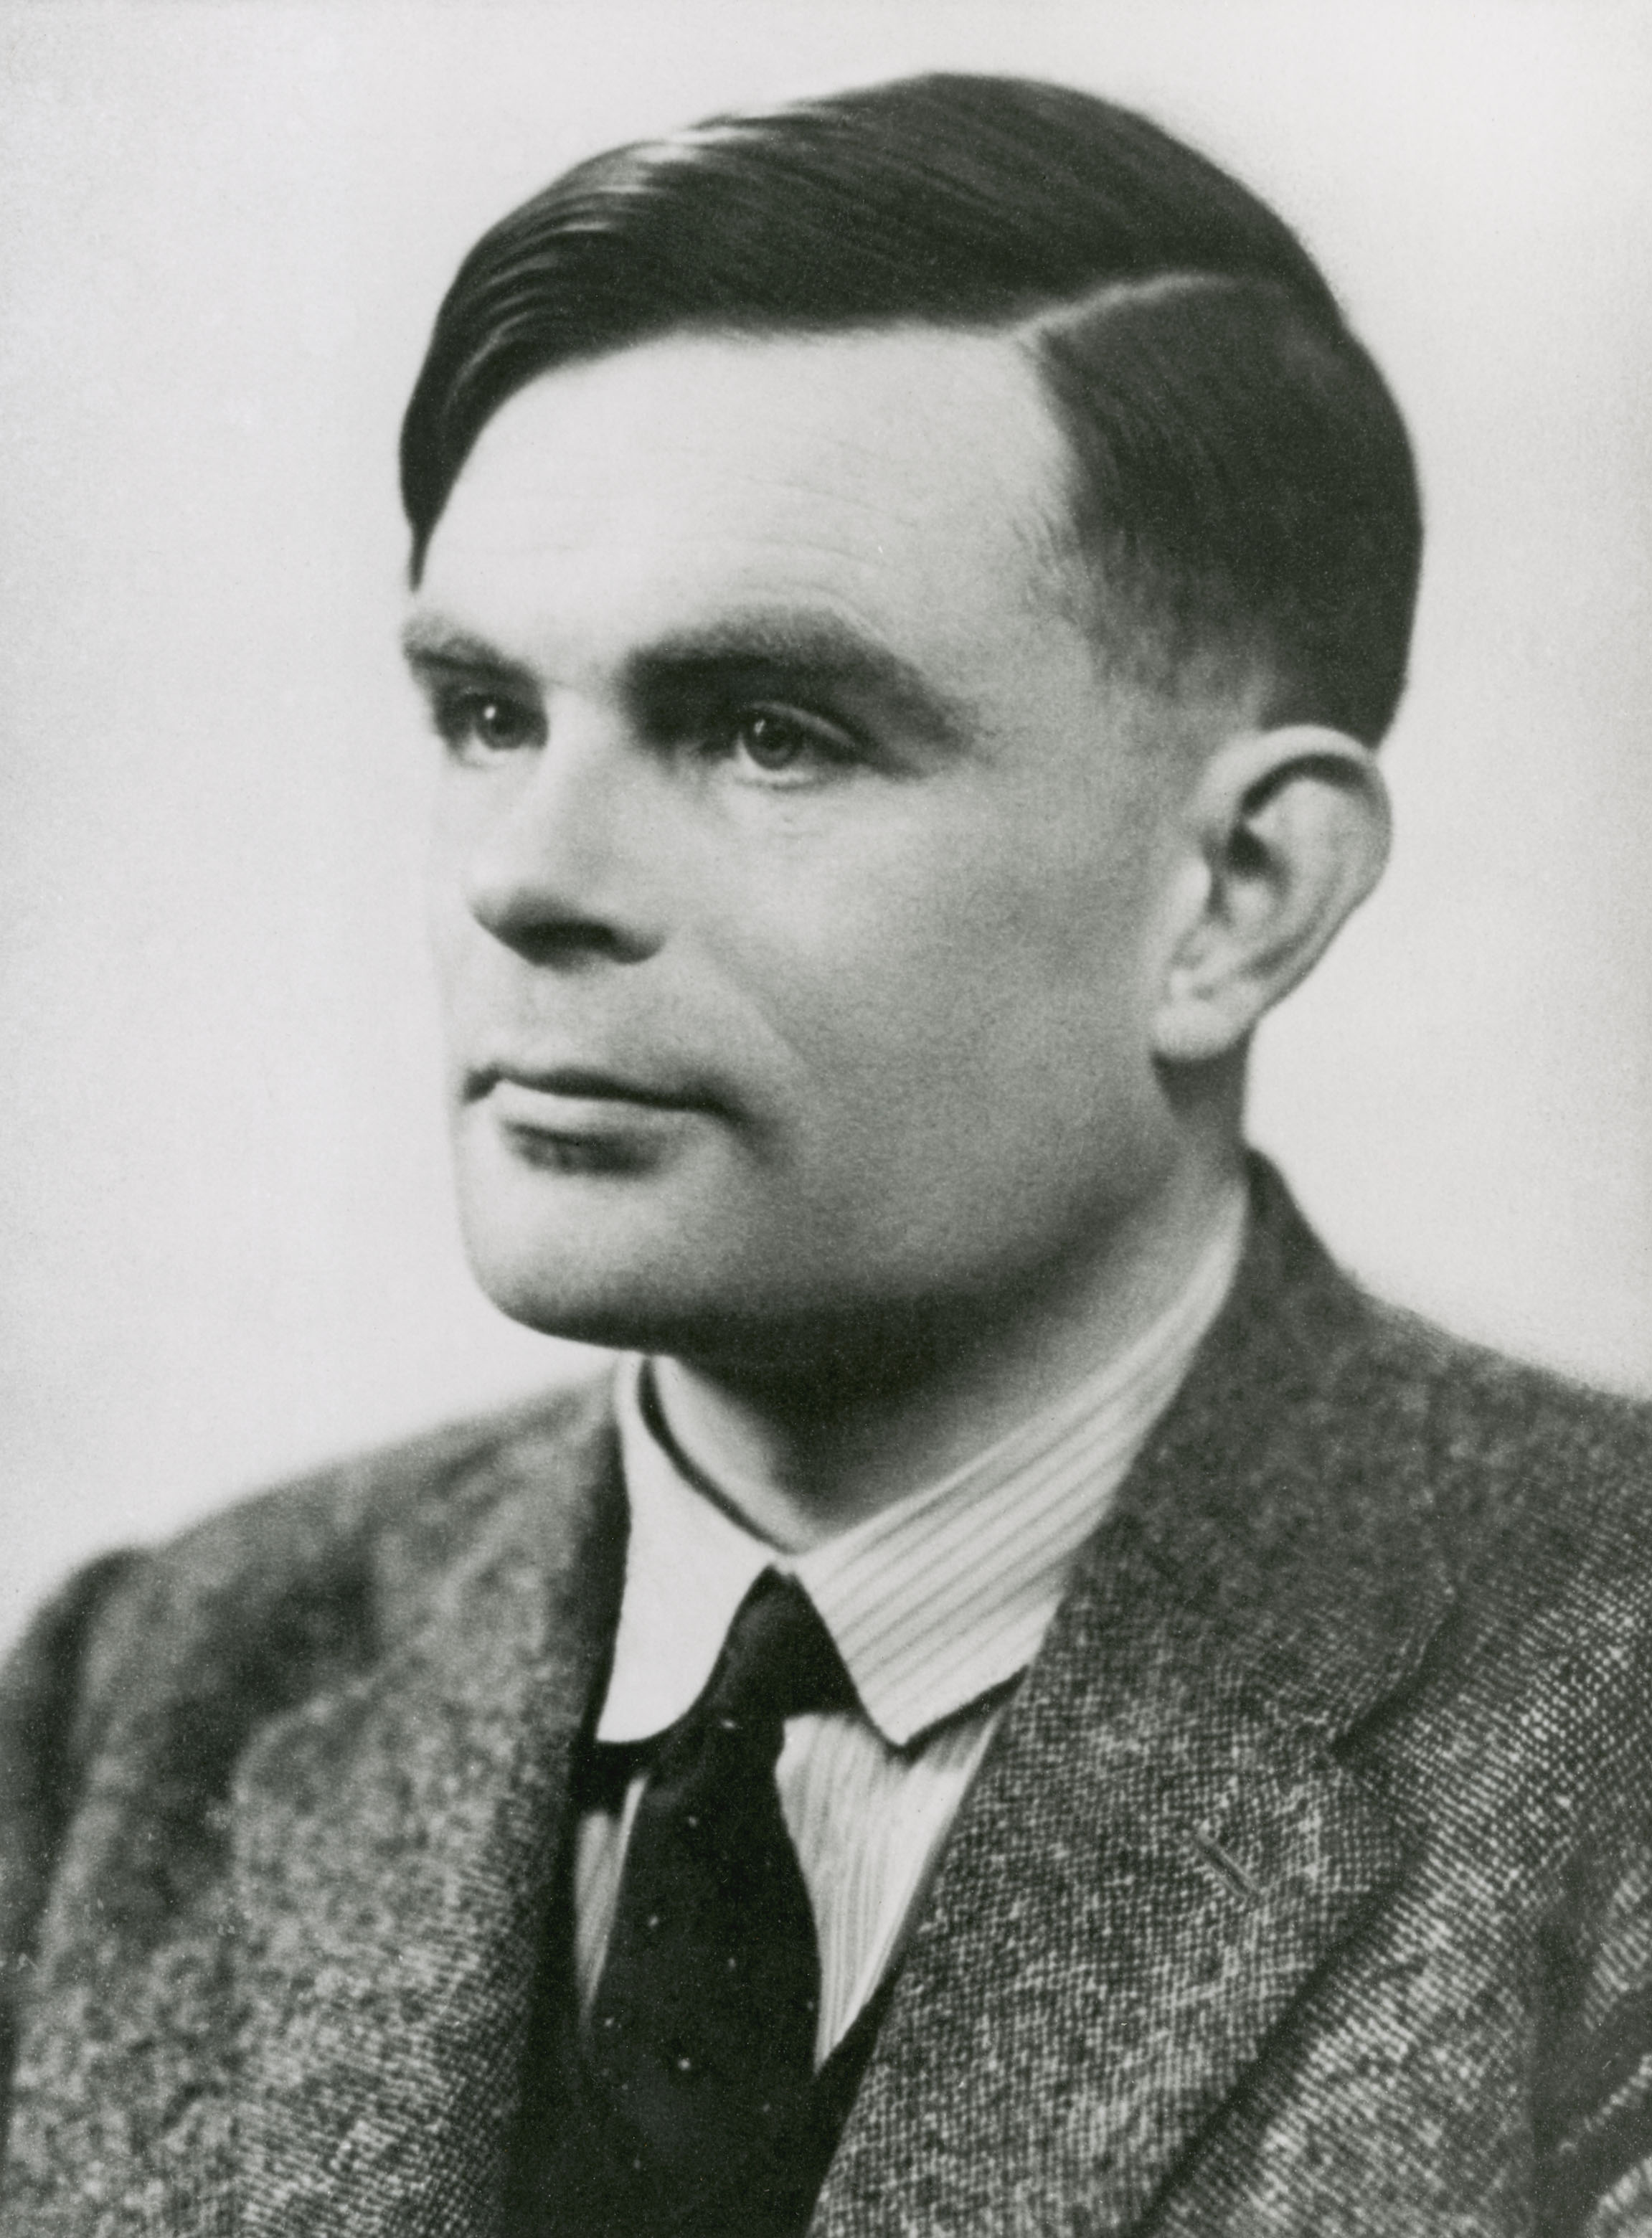 A Portrait of Alan Turing from the National Physical Laboratory archive